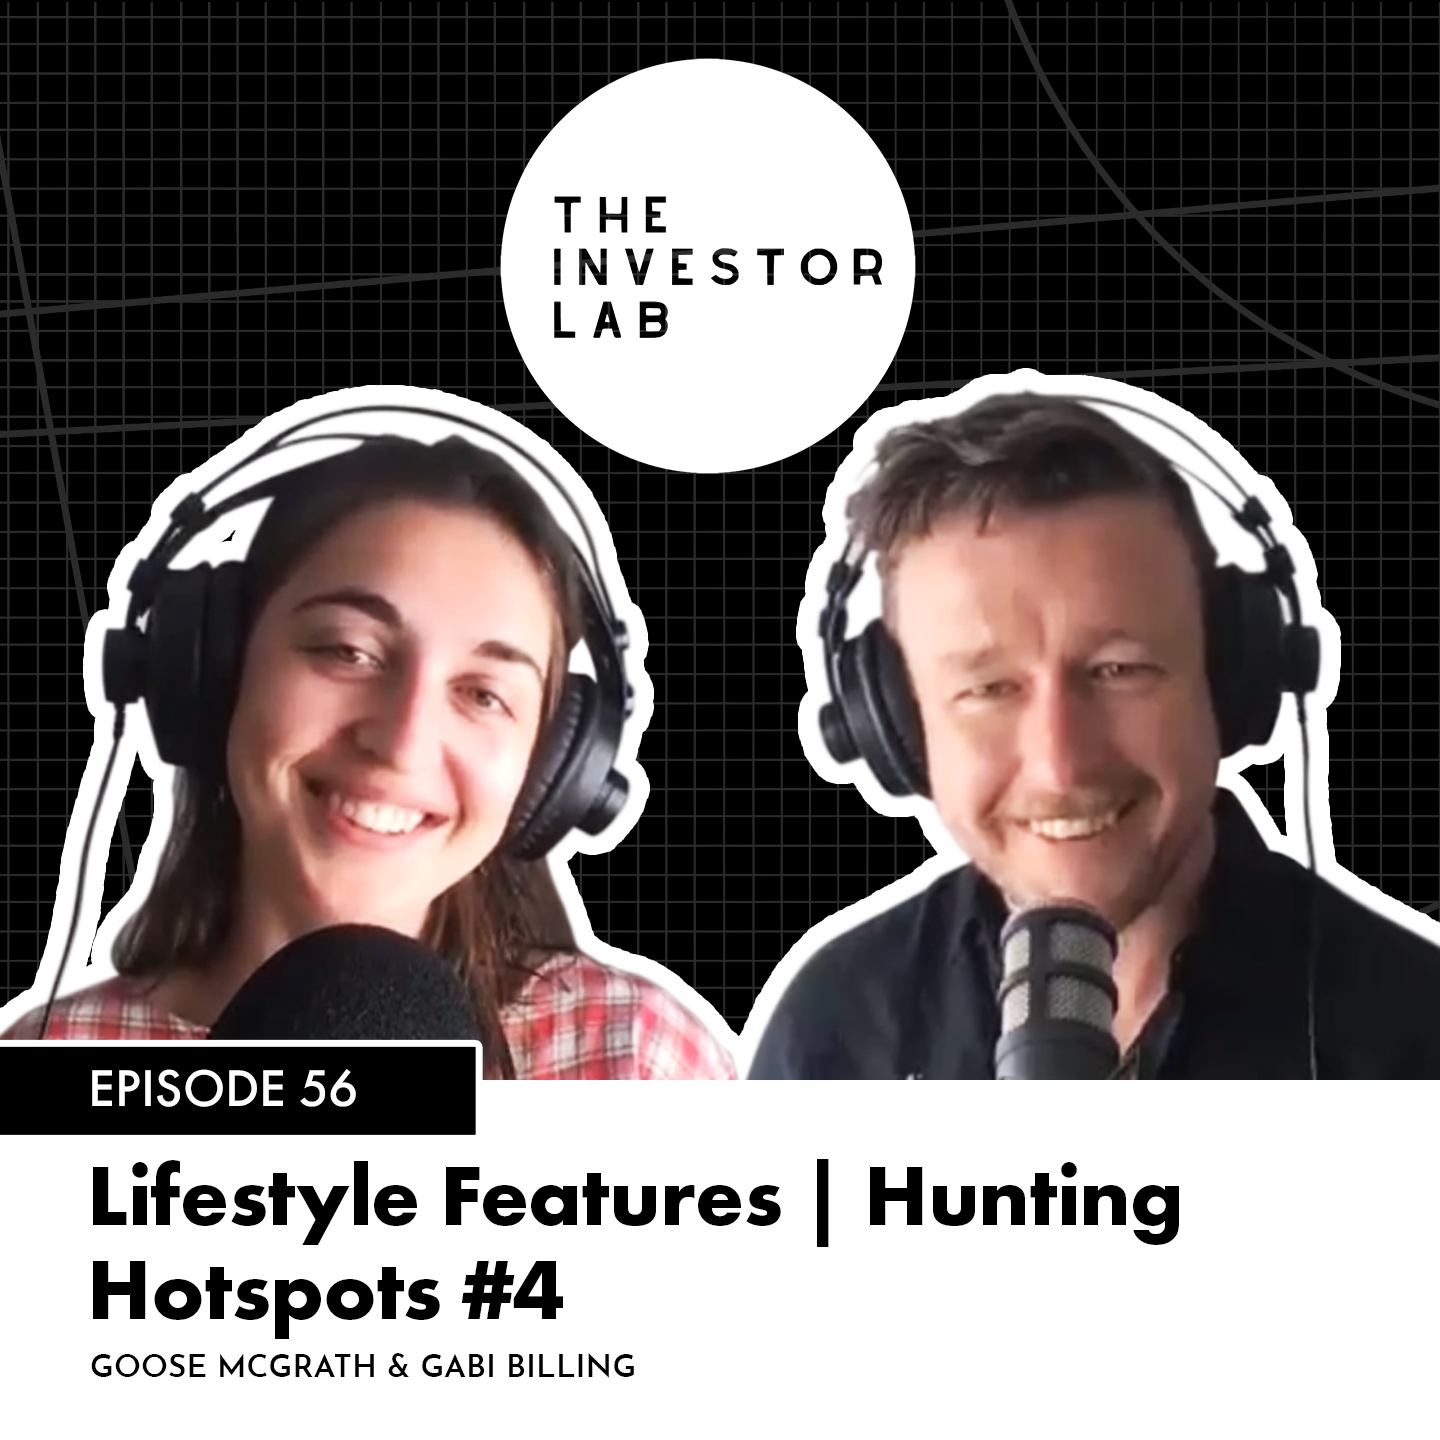 Lifestyle Features | Hunting Hotspots #4